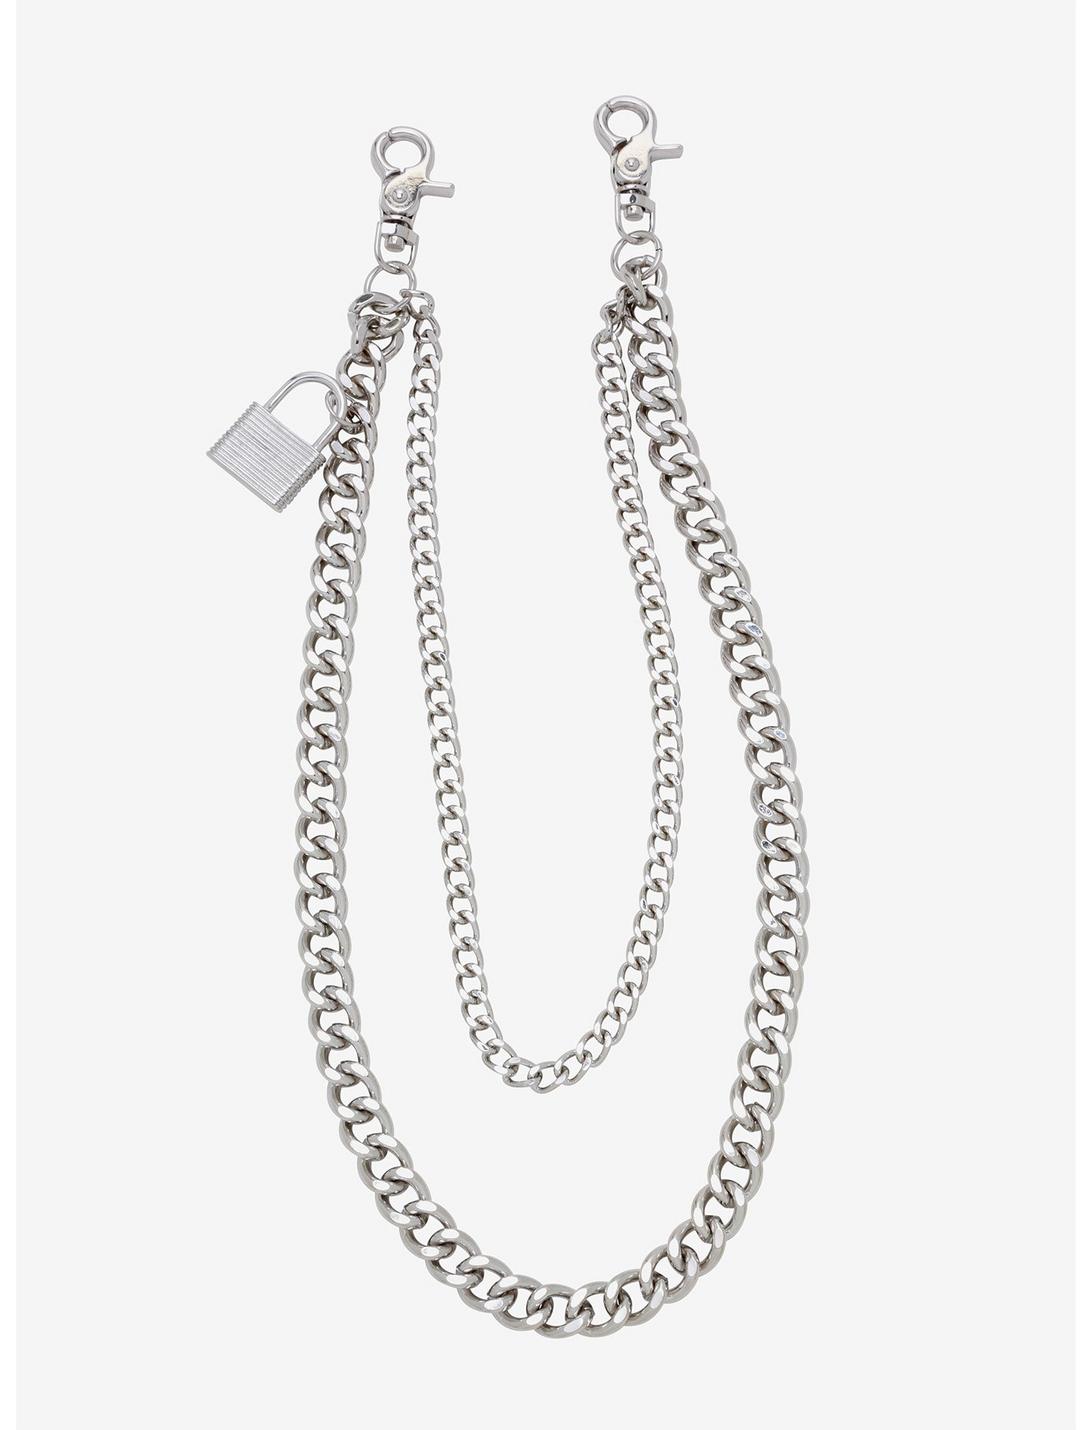 Silver 18 Inch & 24 Inch Pad Lock Double Wallet Chain